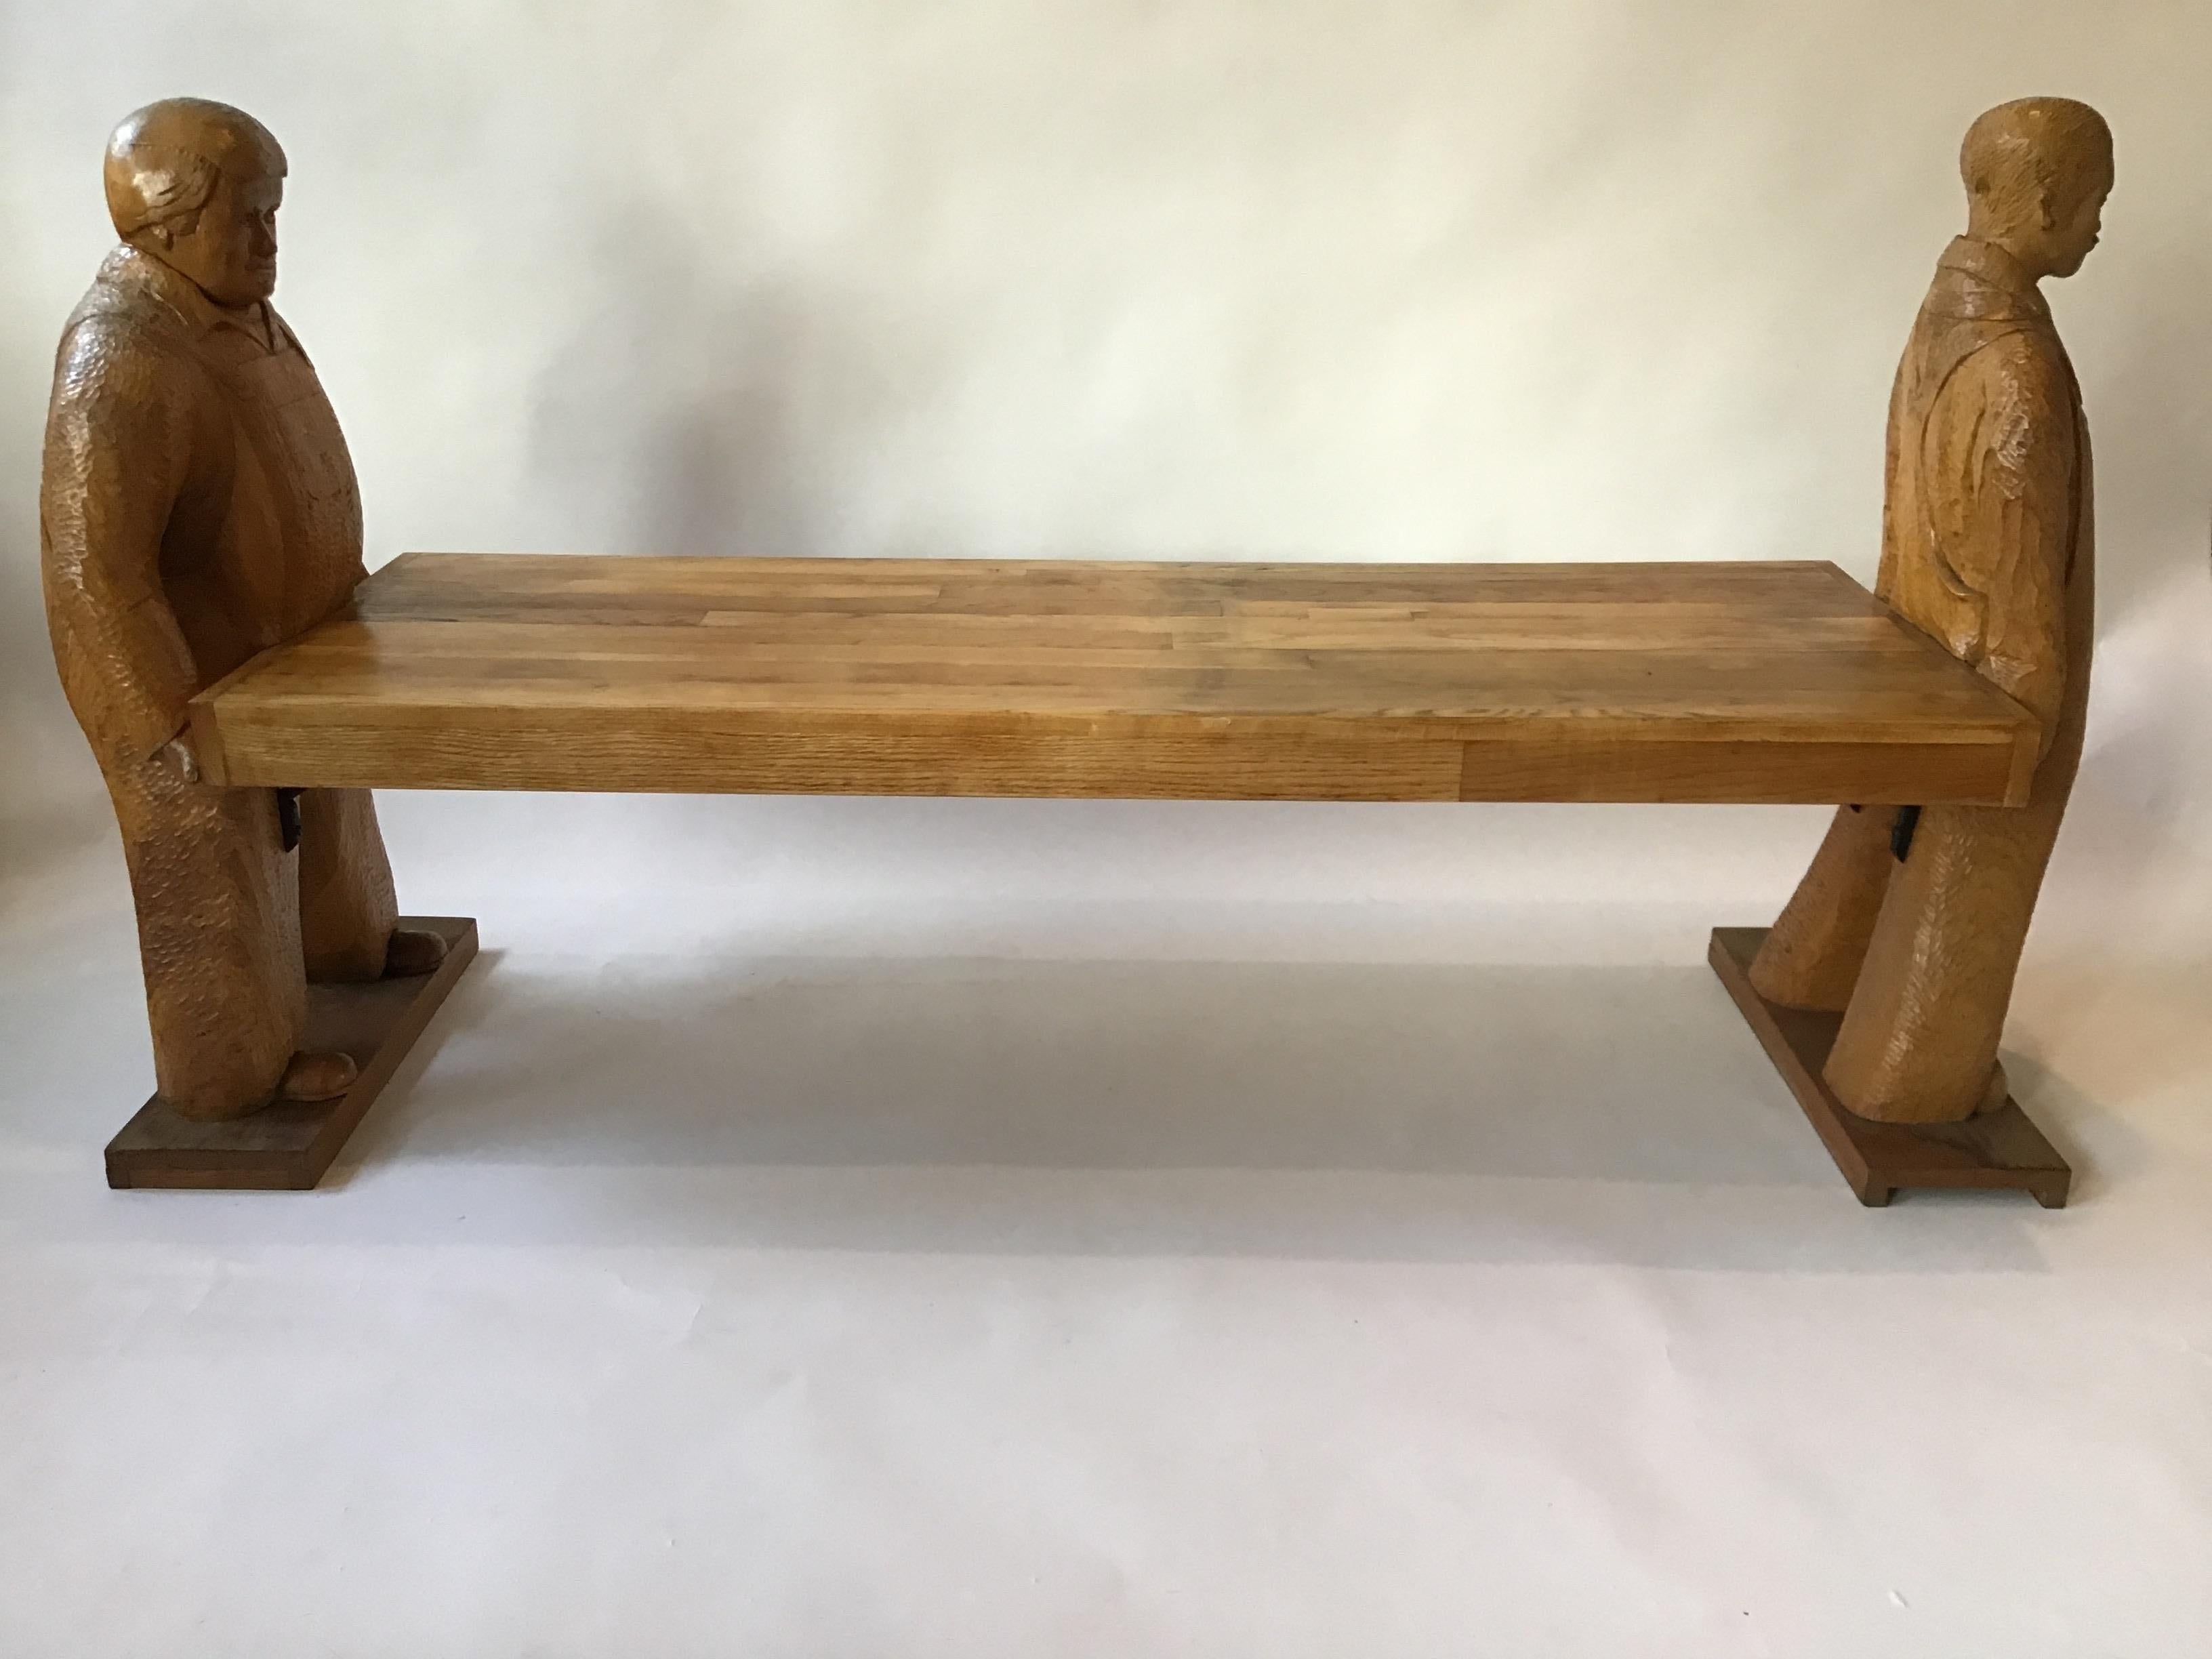 Two workers carrying a plank of wood. Hand carved wood. Can be used either as a table or bench. Signed on the bottom. Out of a Southampton, NY estate.